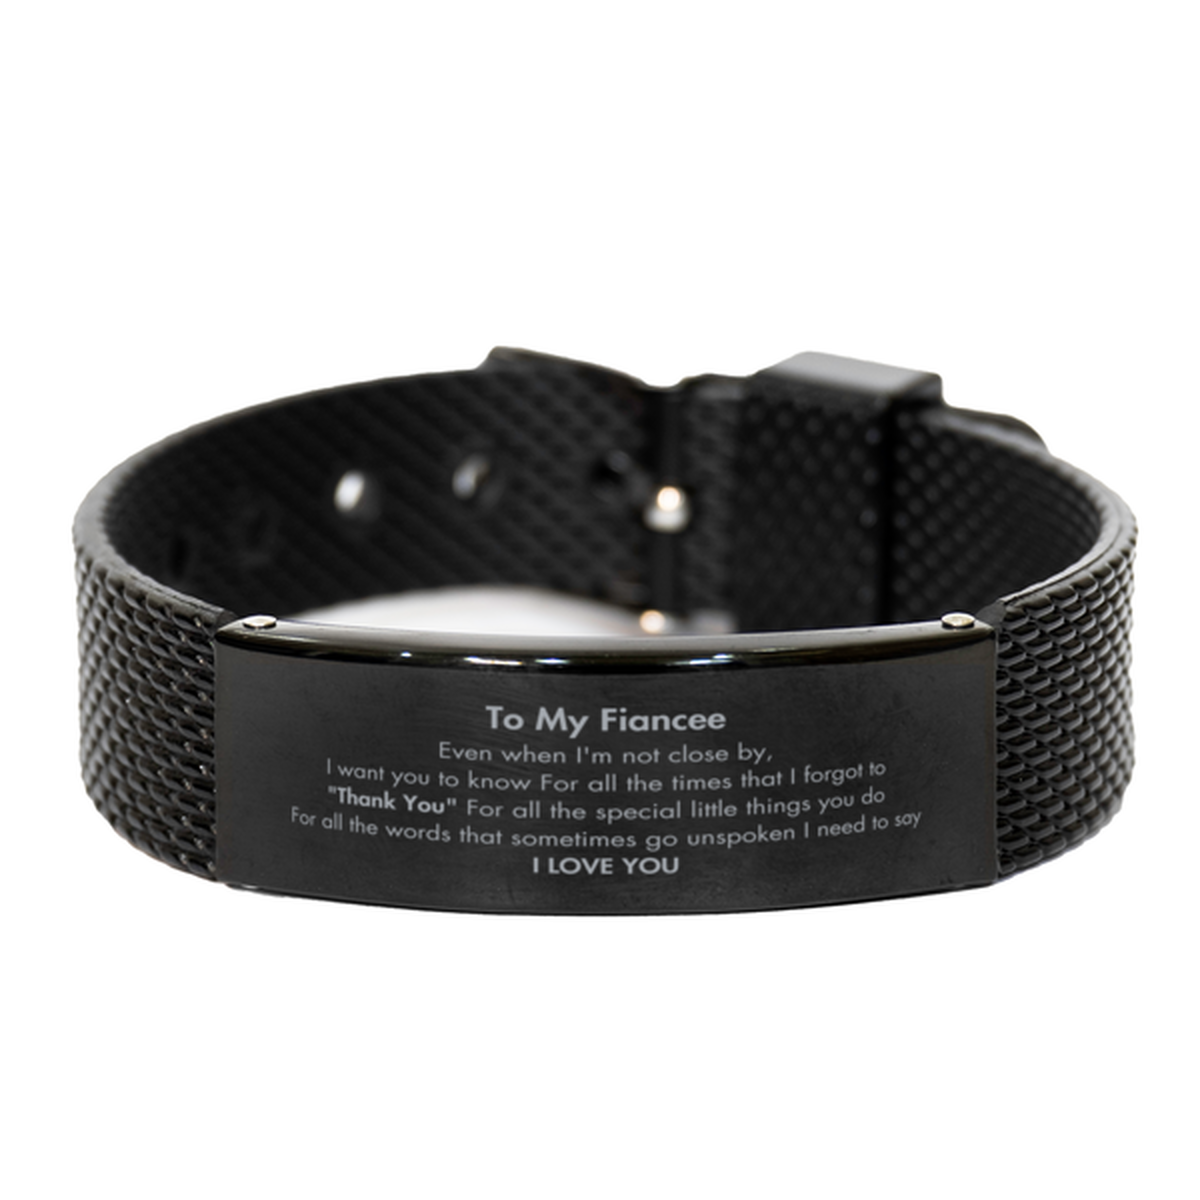 Thank You Gifts for Fiancee, Keepsake Black Shark Mesh Bracelet Gifts for Fiancee Birthday Mother's day Father's Day Fiancee For all the words That sometimes go unspoken I need to say I LOVE YOU